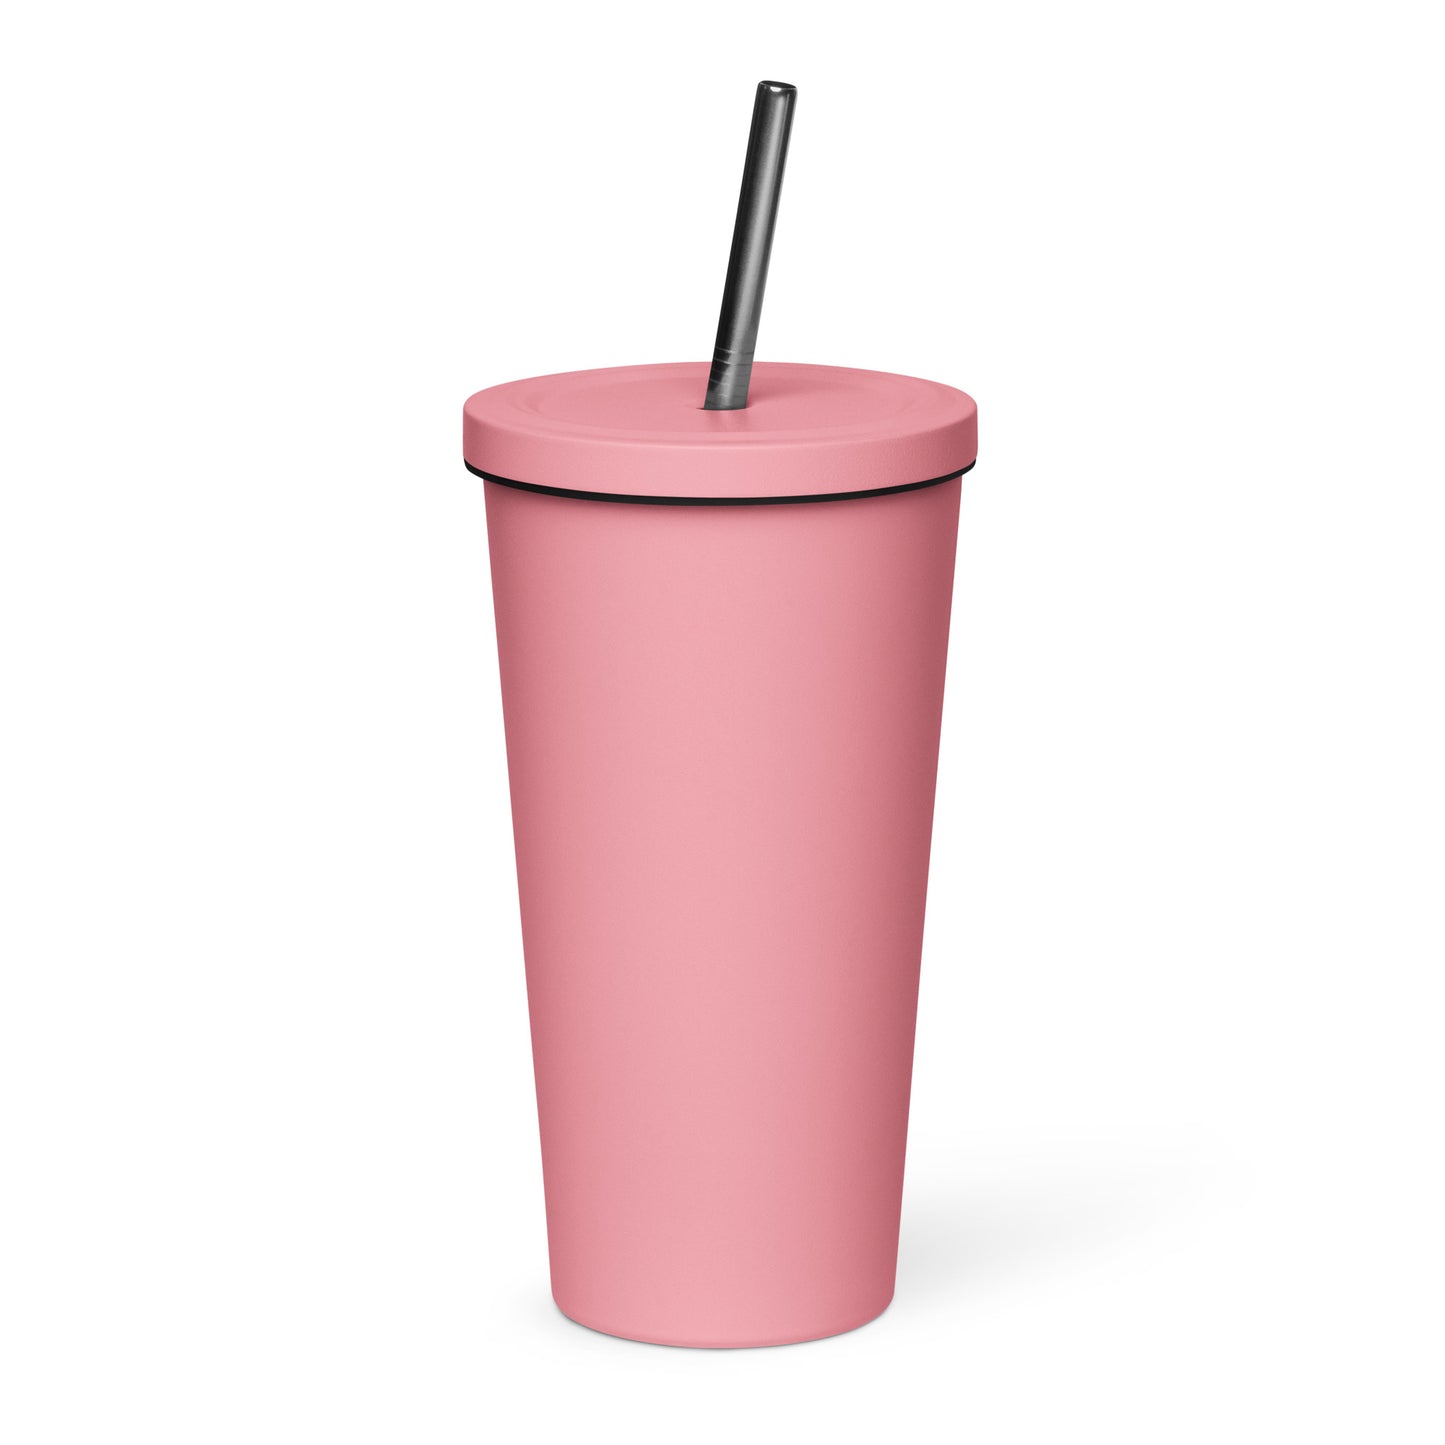 Insulated tumbler with a straw- Crazy Horse 13 - offthespeed